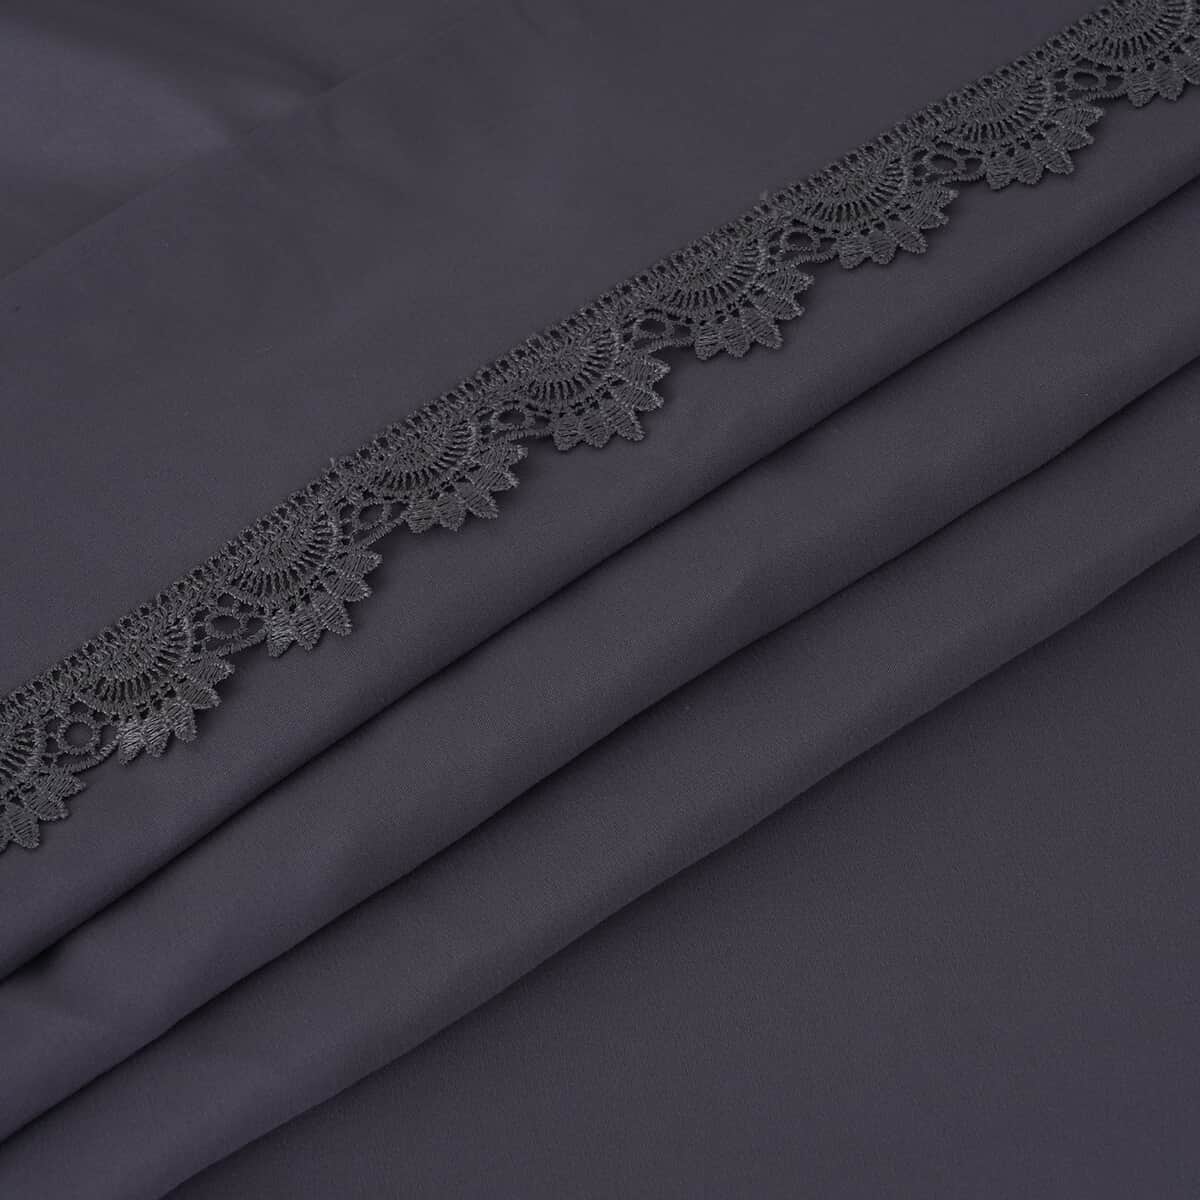 HOMESMART Gray Lace Embroidered Microfiber 6 pc Sheet Set - (with 14 inch Deep Pocket)- Queen image number 5